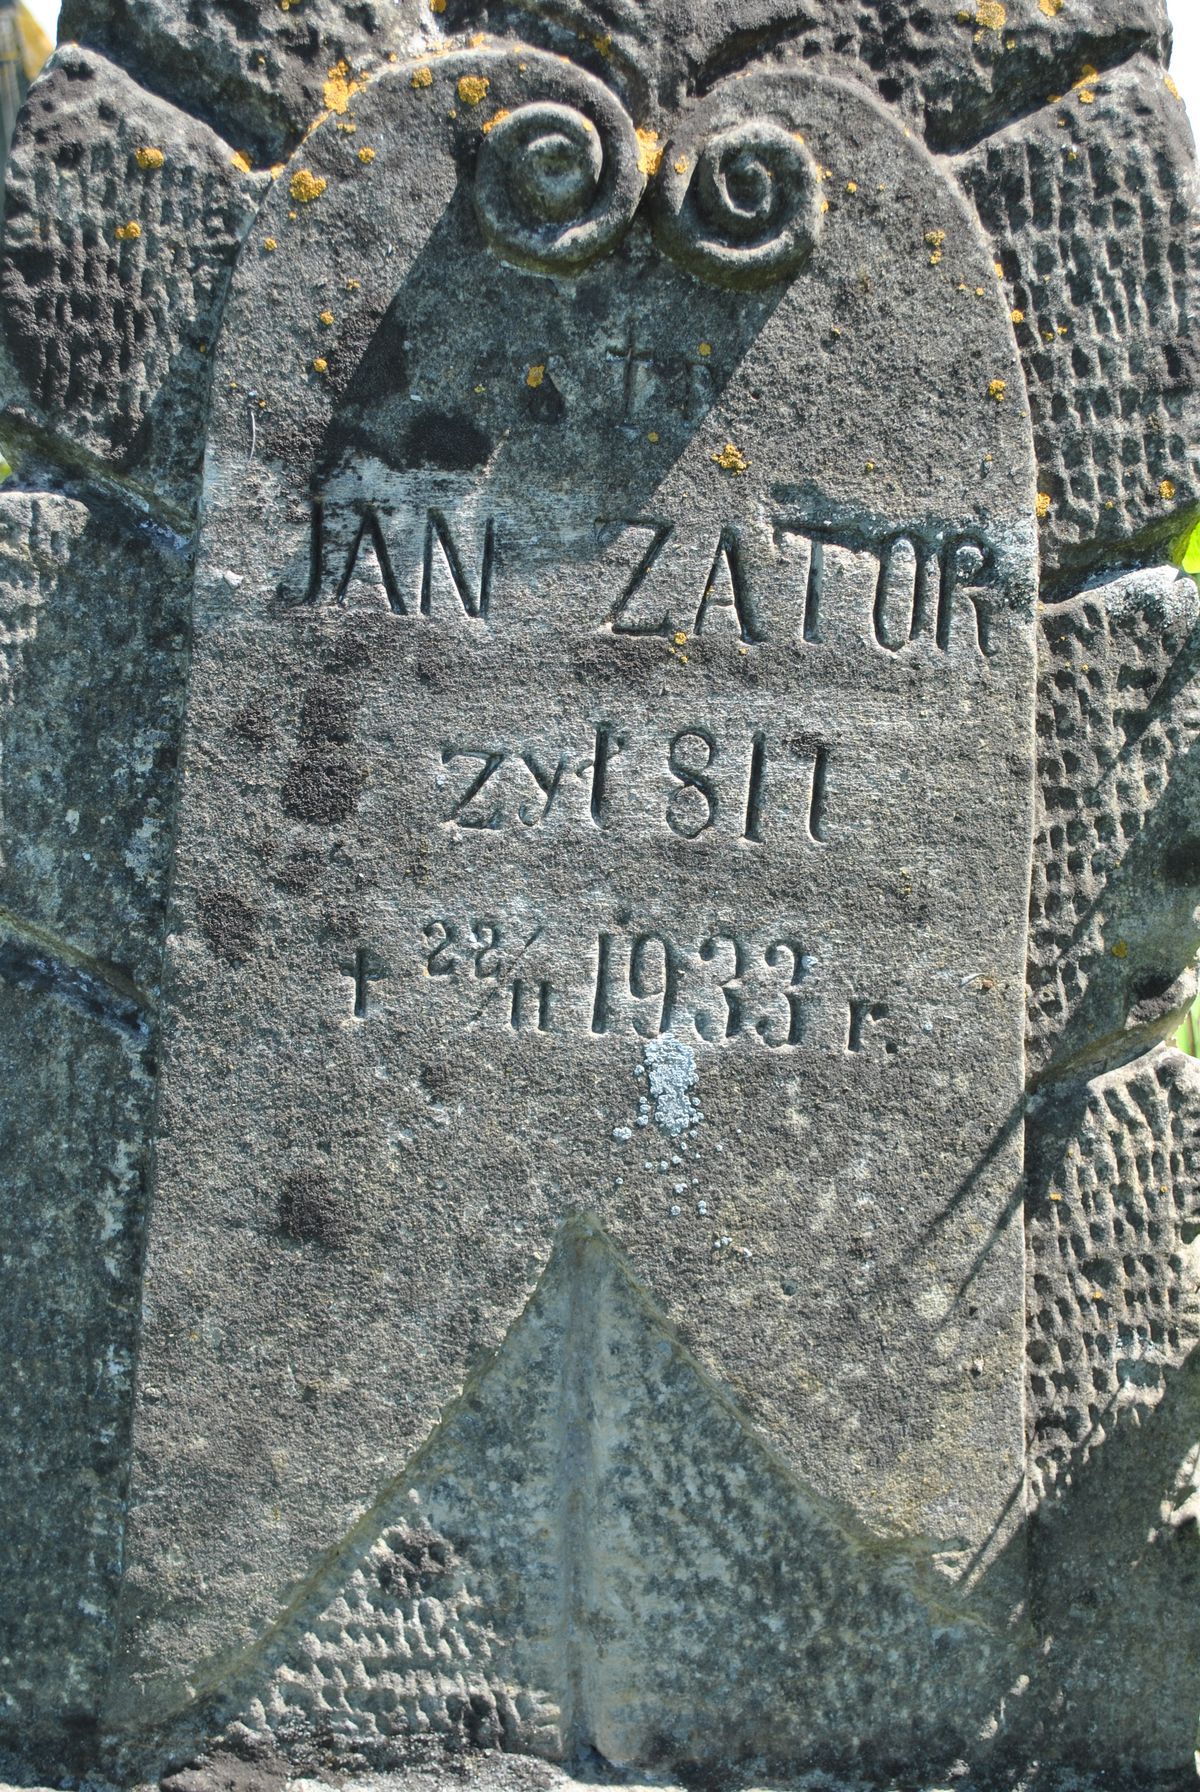 Tombstone of Jan Zator, cemetery in Poczapińce